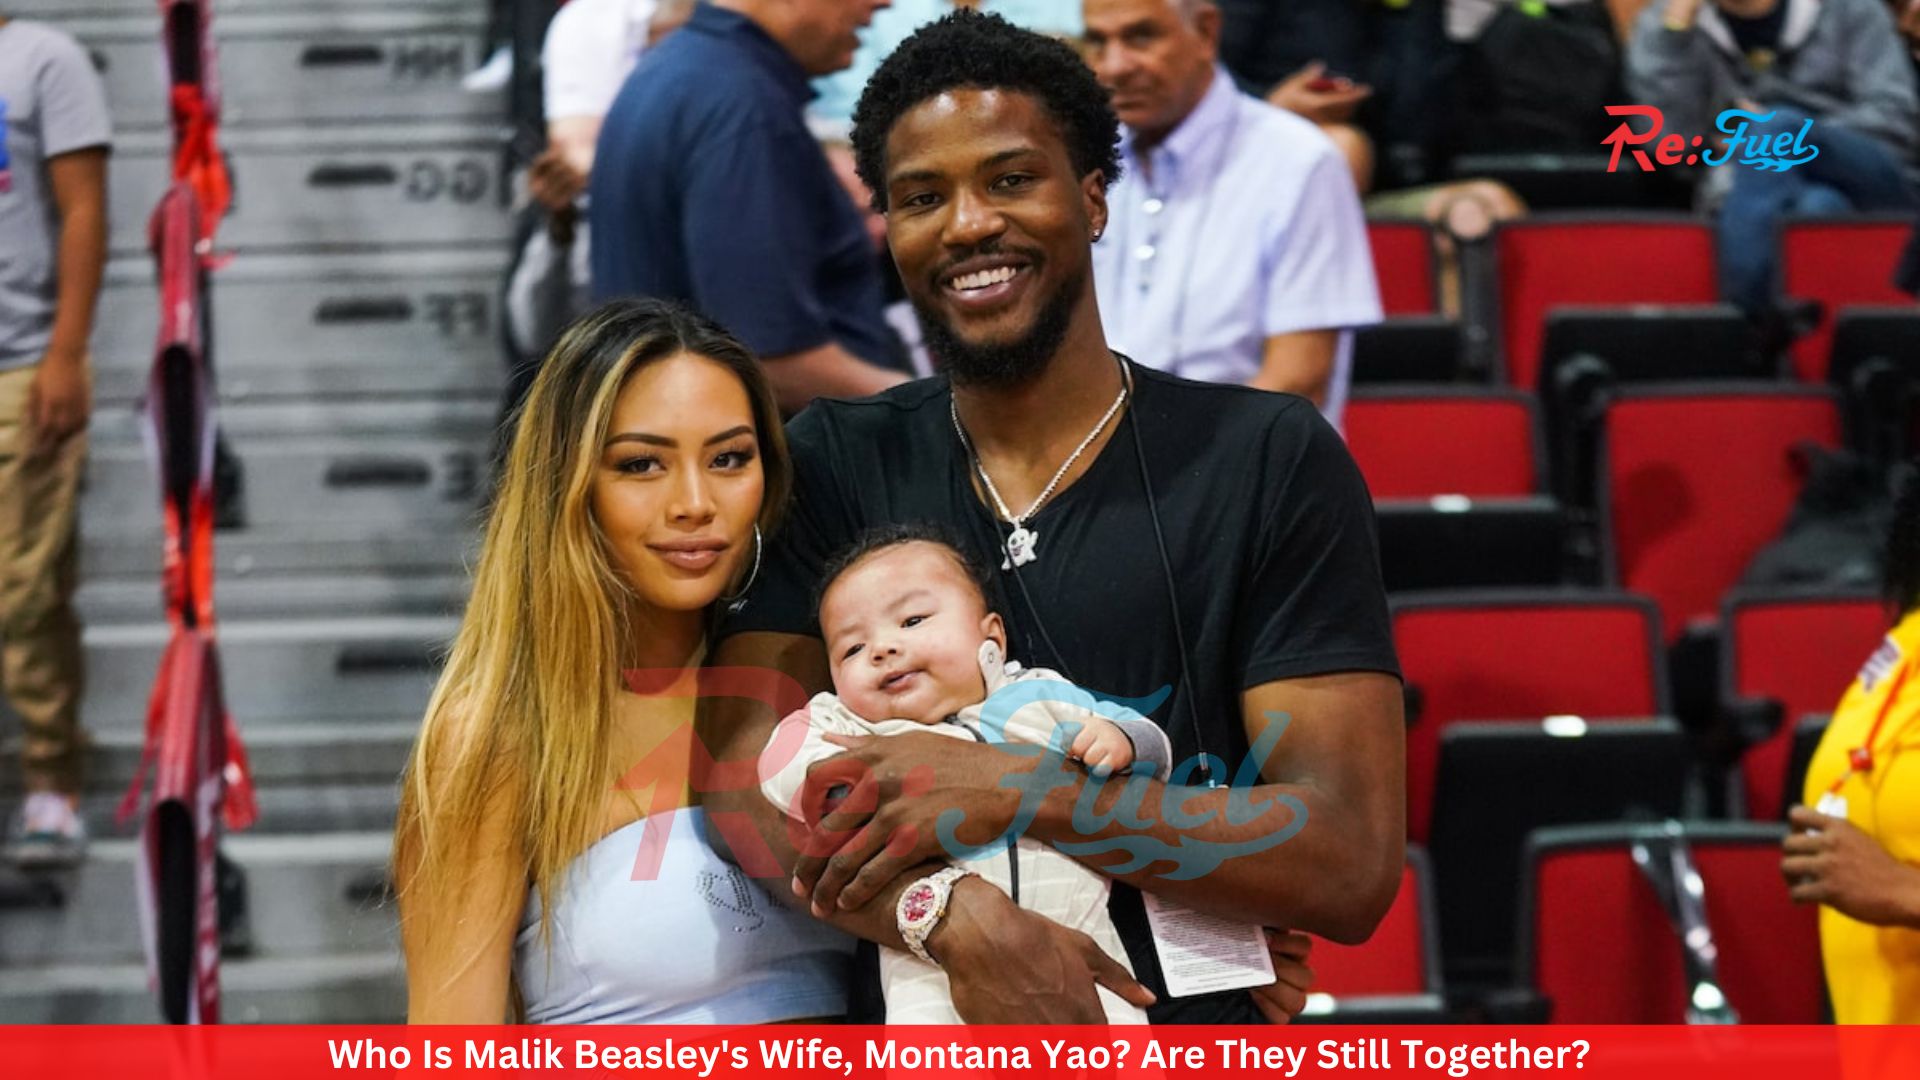 Who Is Malik Beasley's Wife, Montana Yao? Are They Still Together?